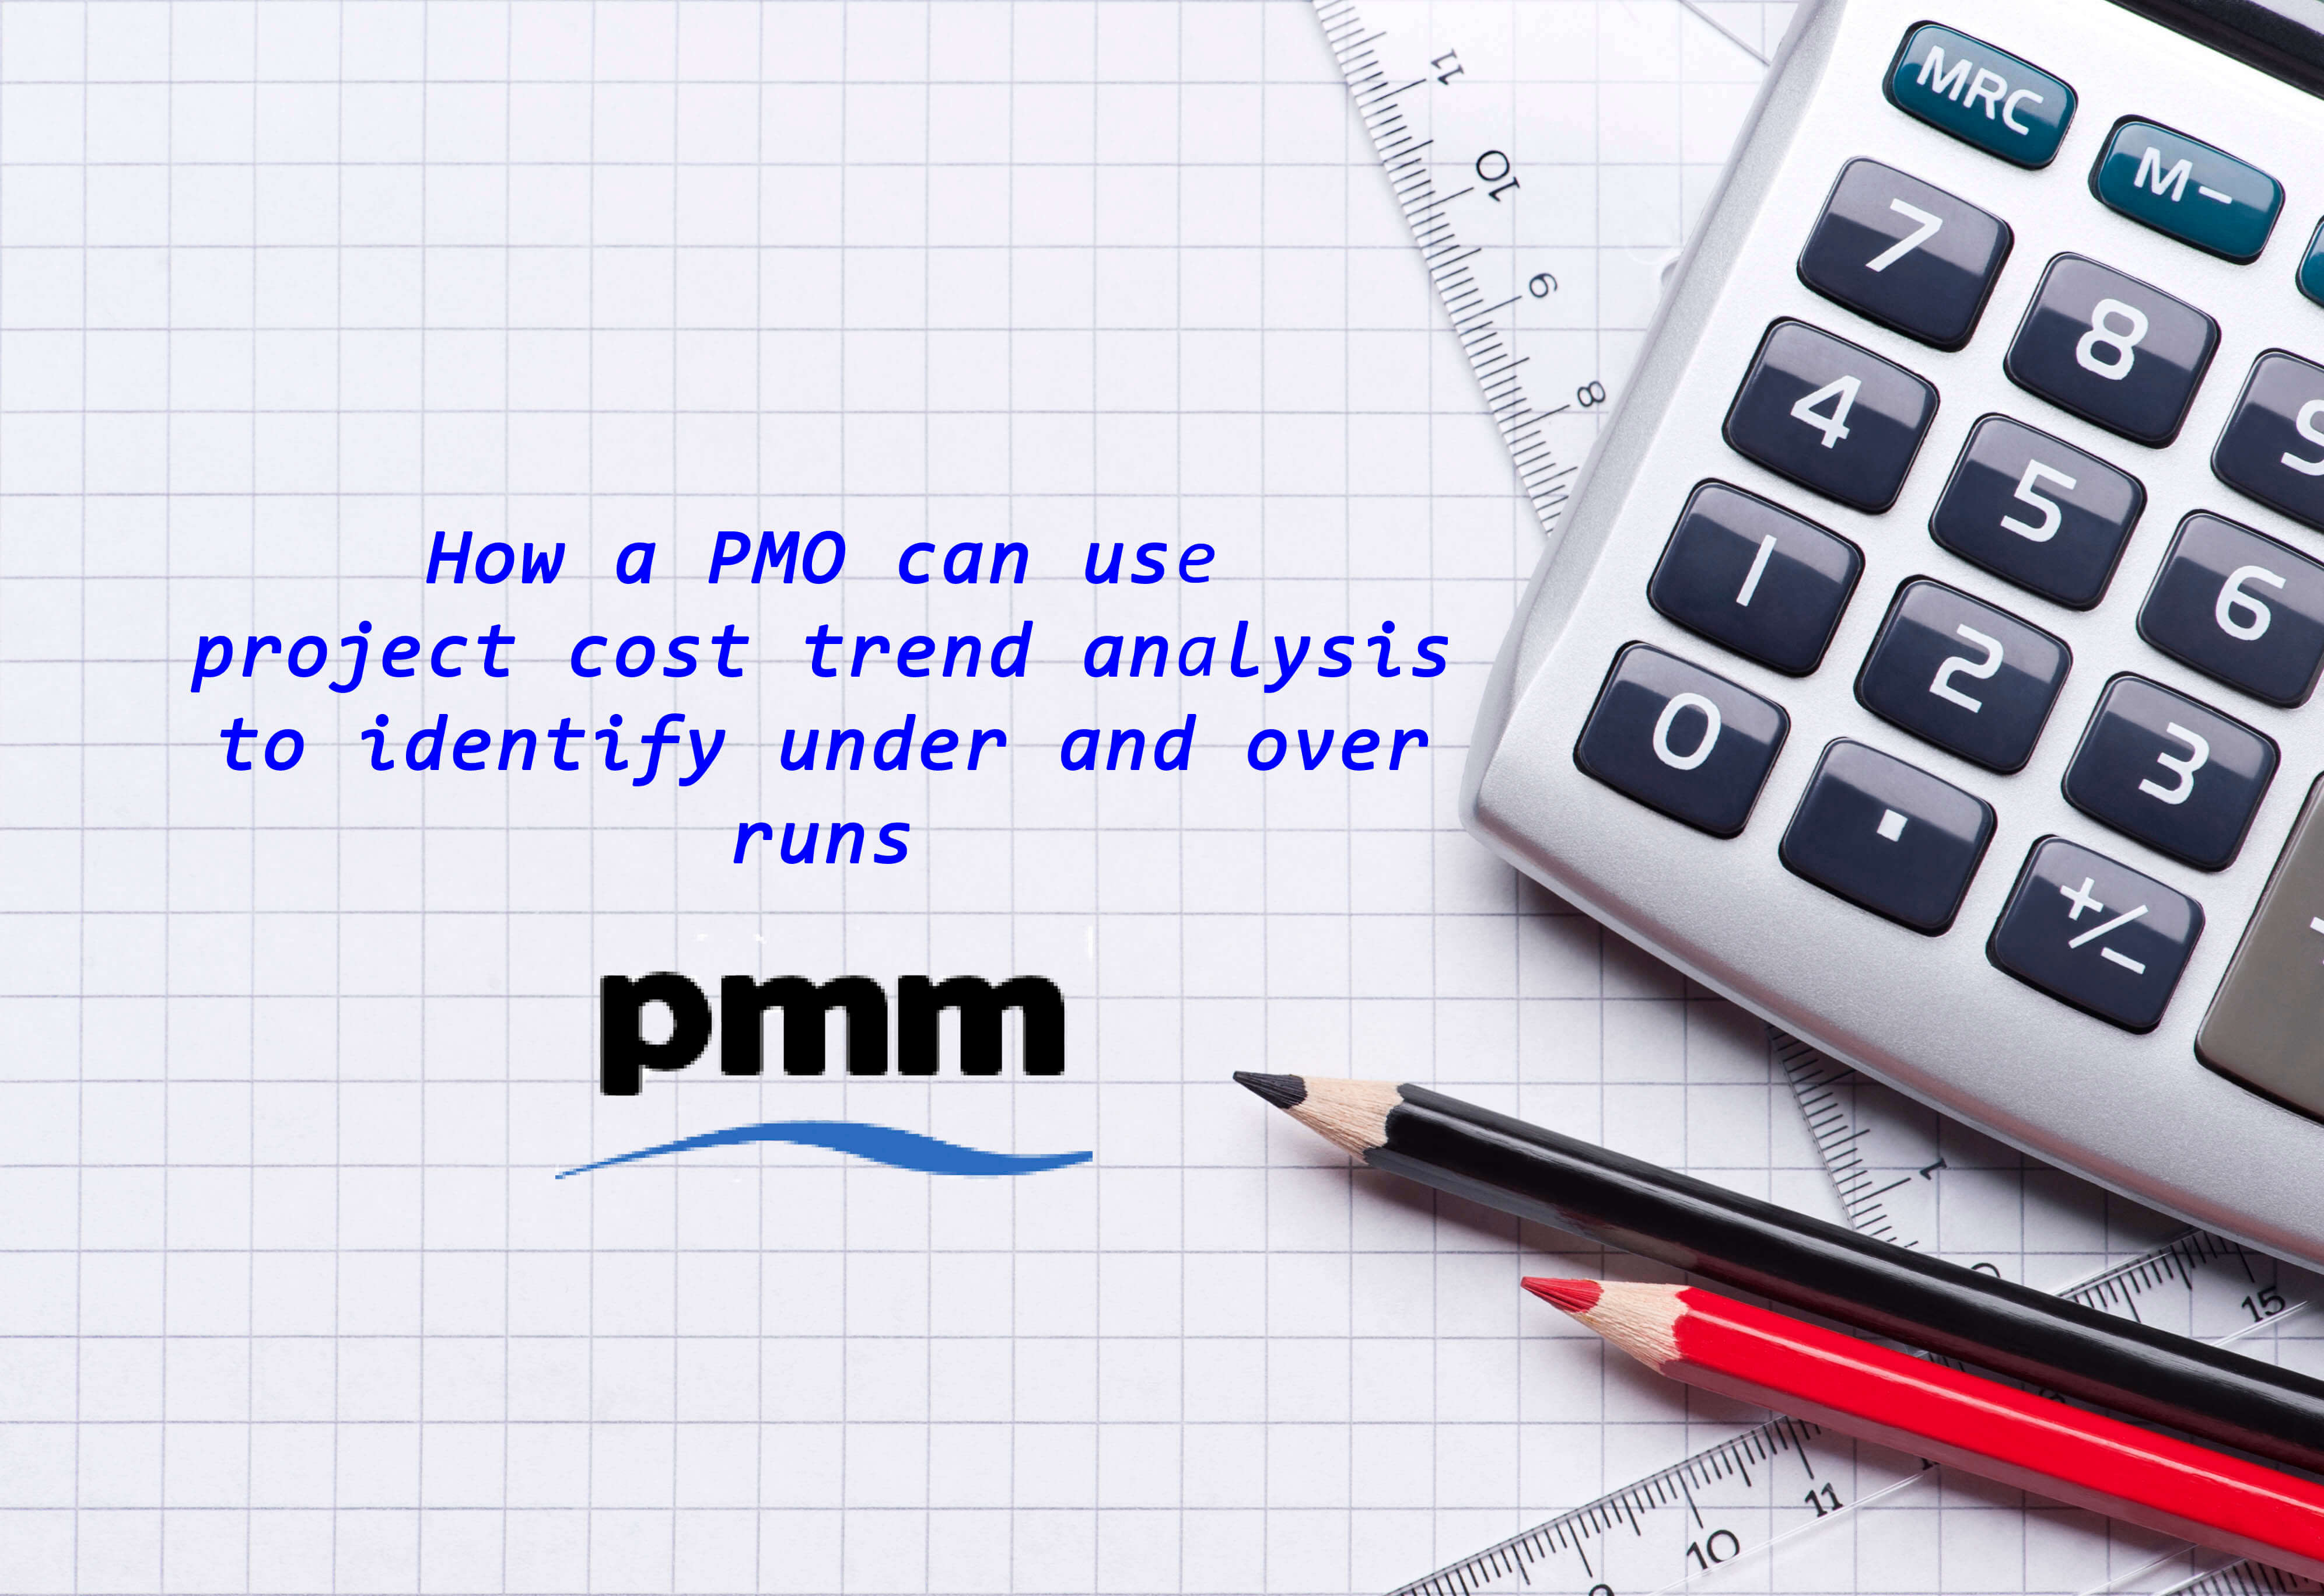 How a PMO can use cost trend analysis to identify budget under and overruns